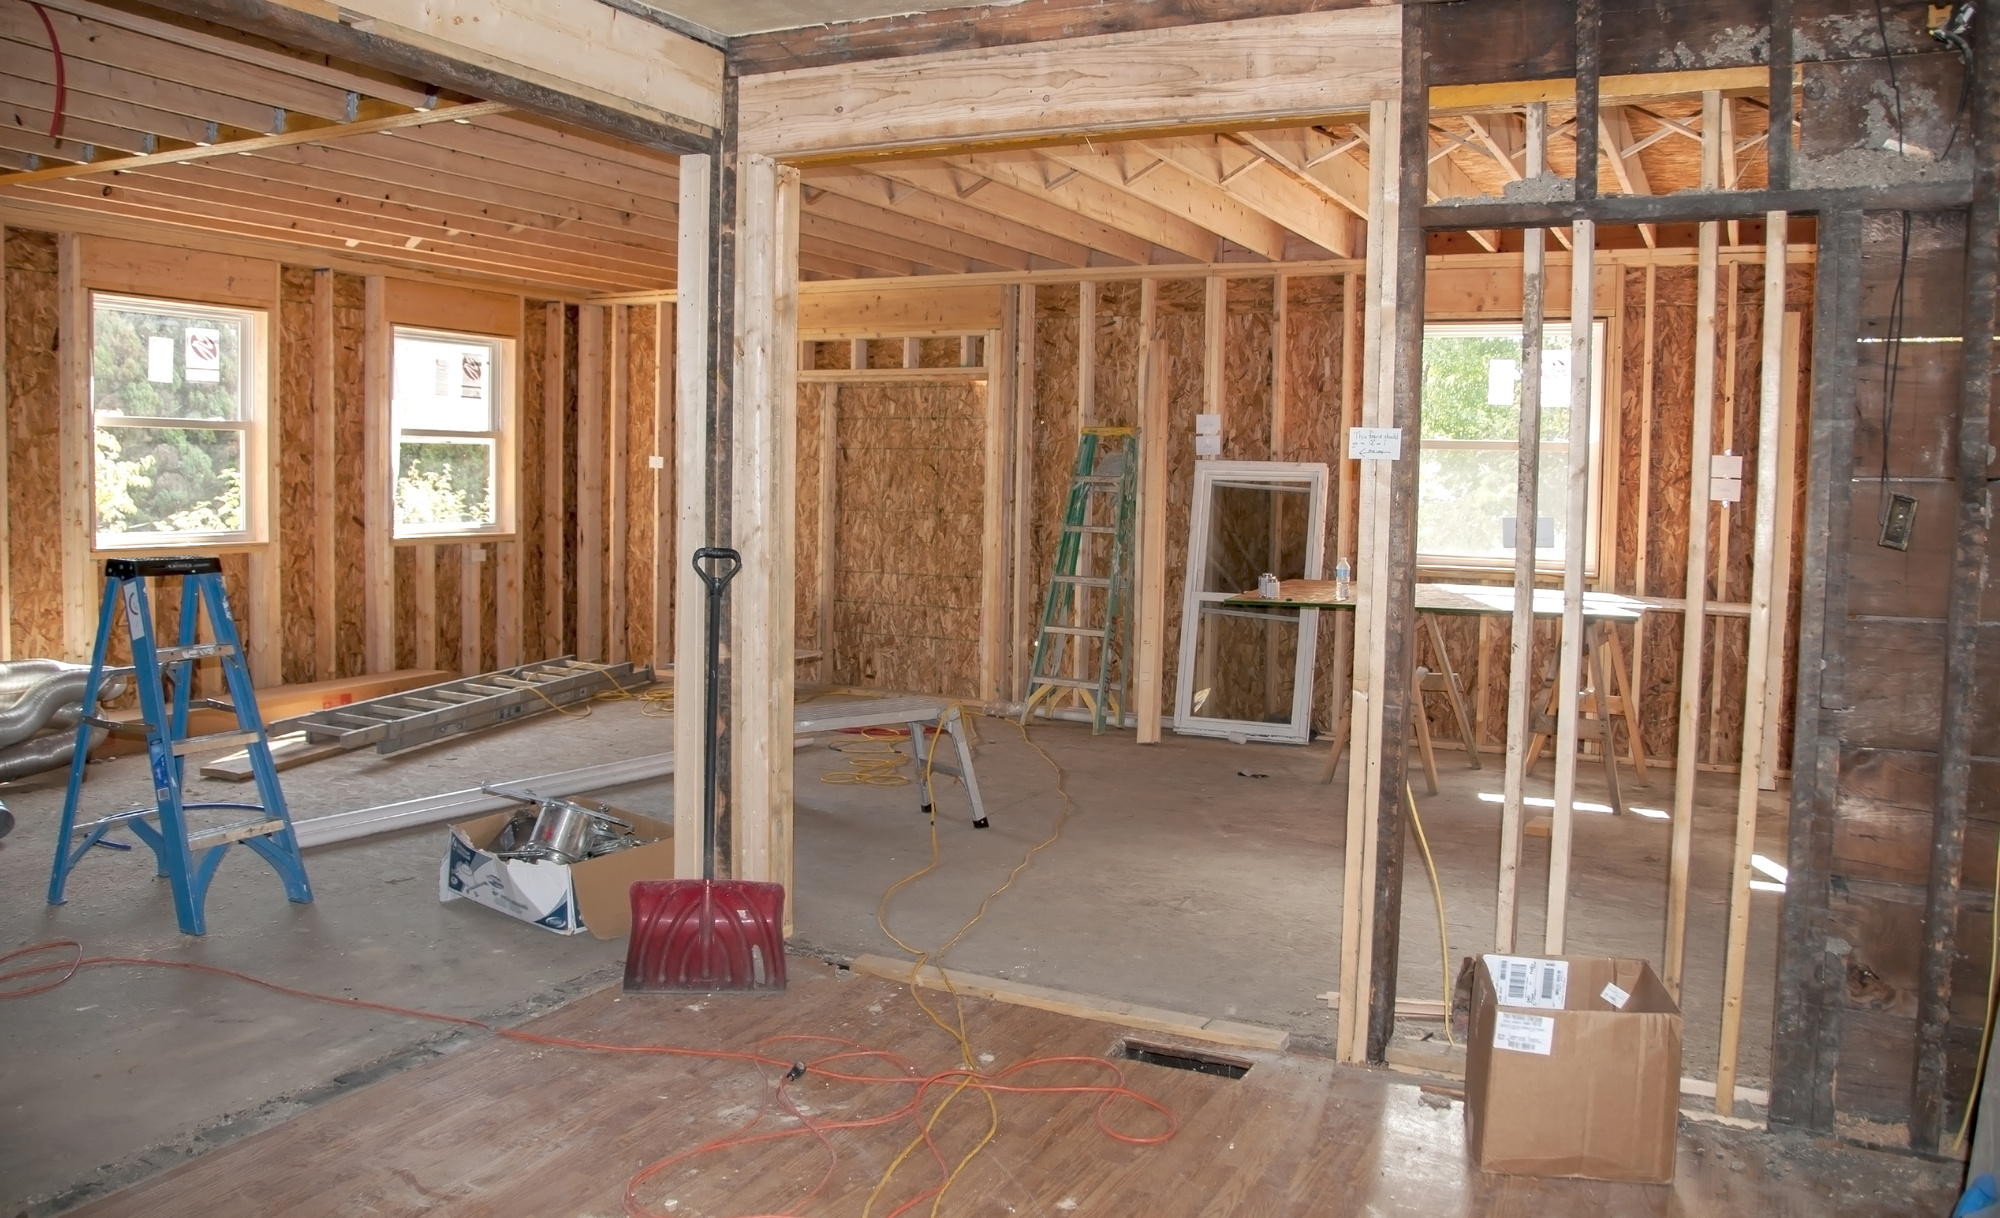 Are you considering a renovation, but not sure how much it will cost? Here are five important things to know about house renovation costs.